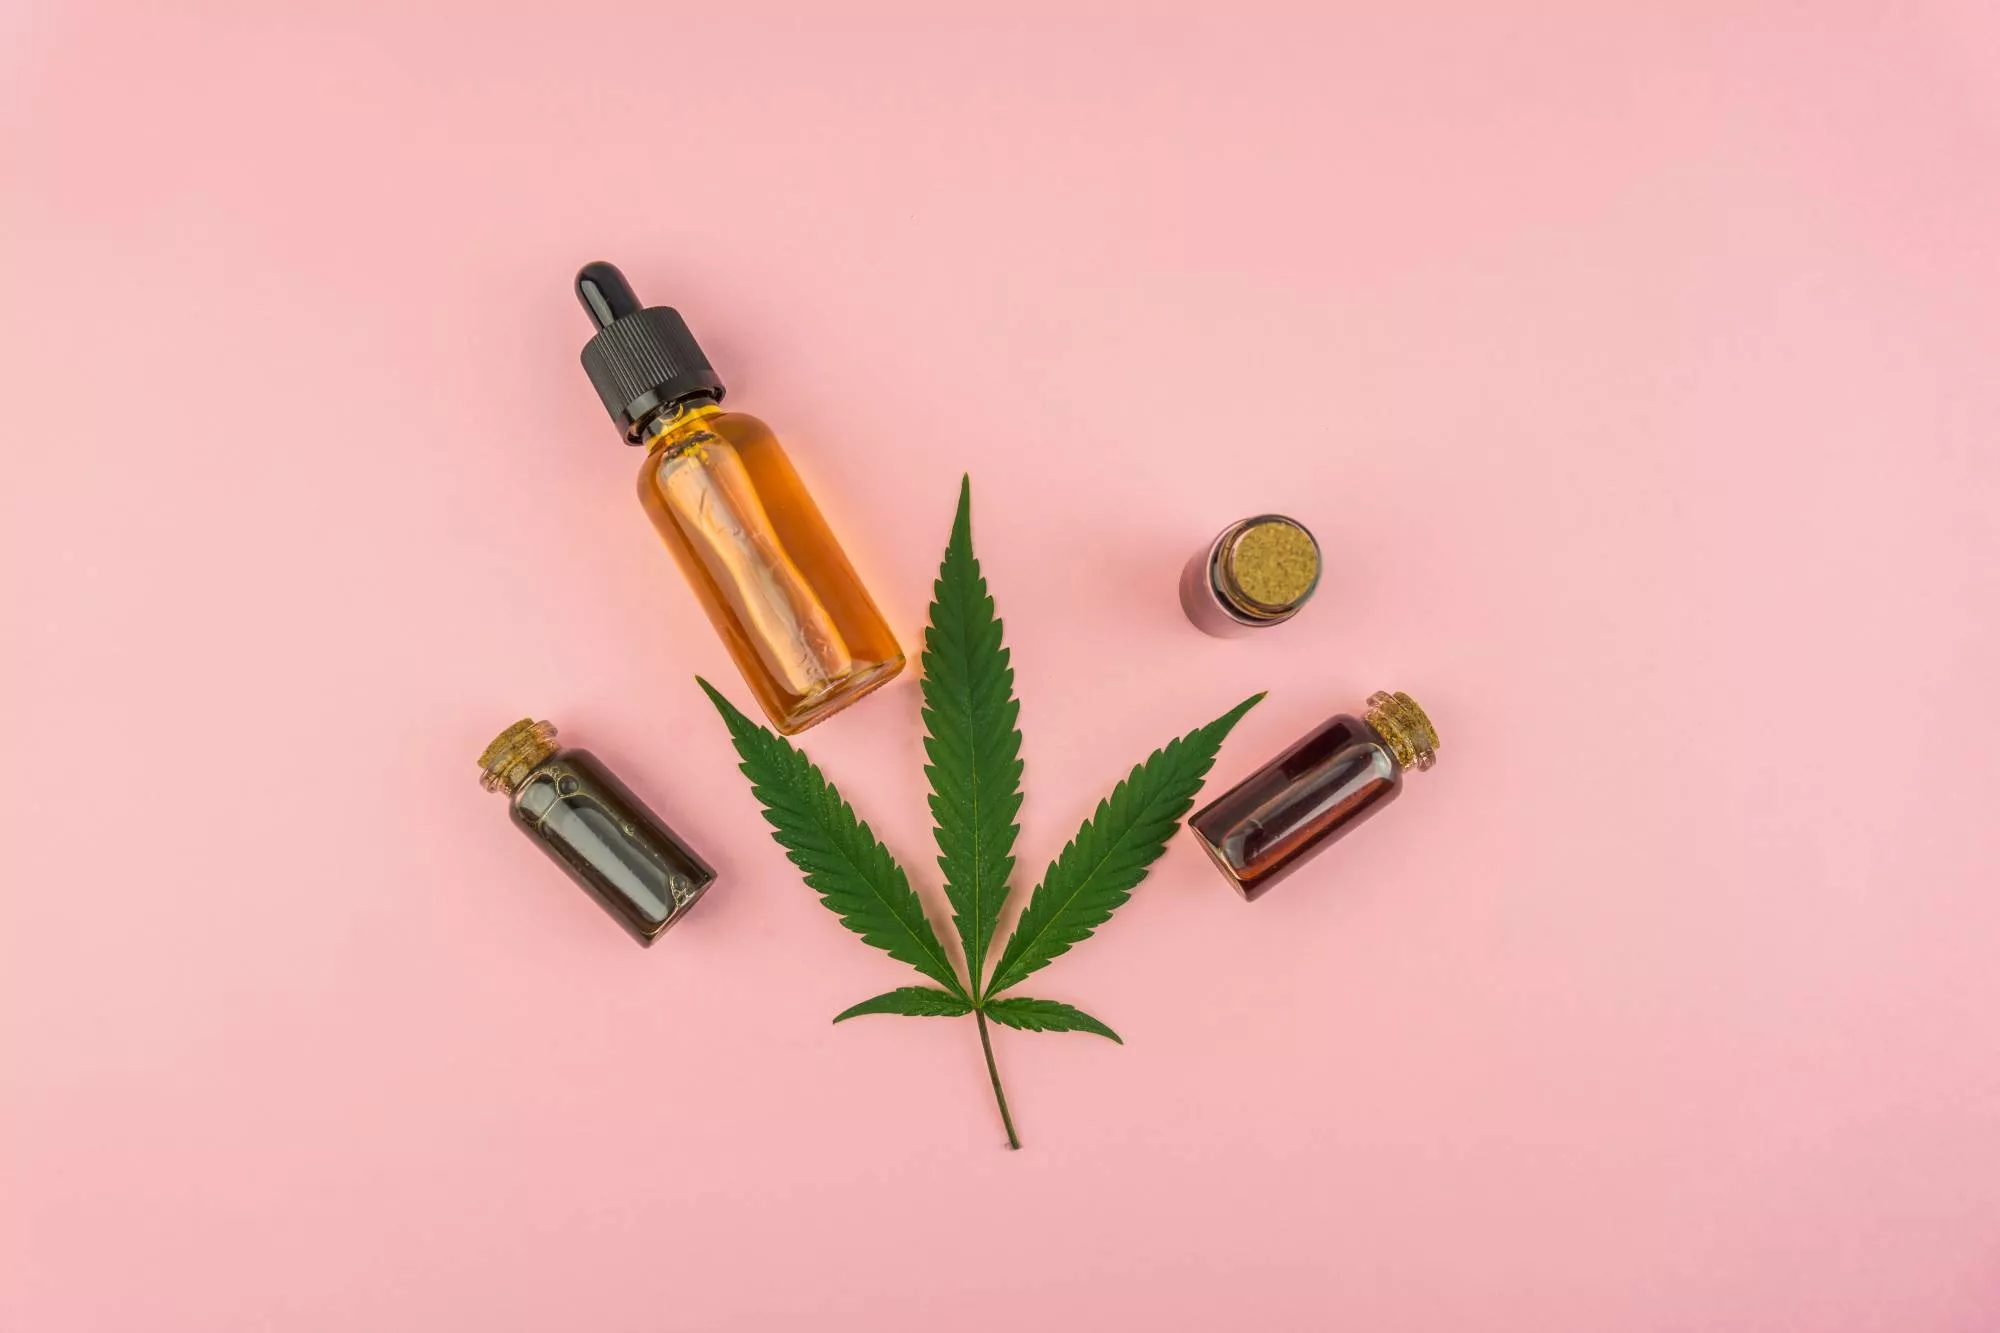 High-risk CBD products against a millennial pink background